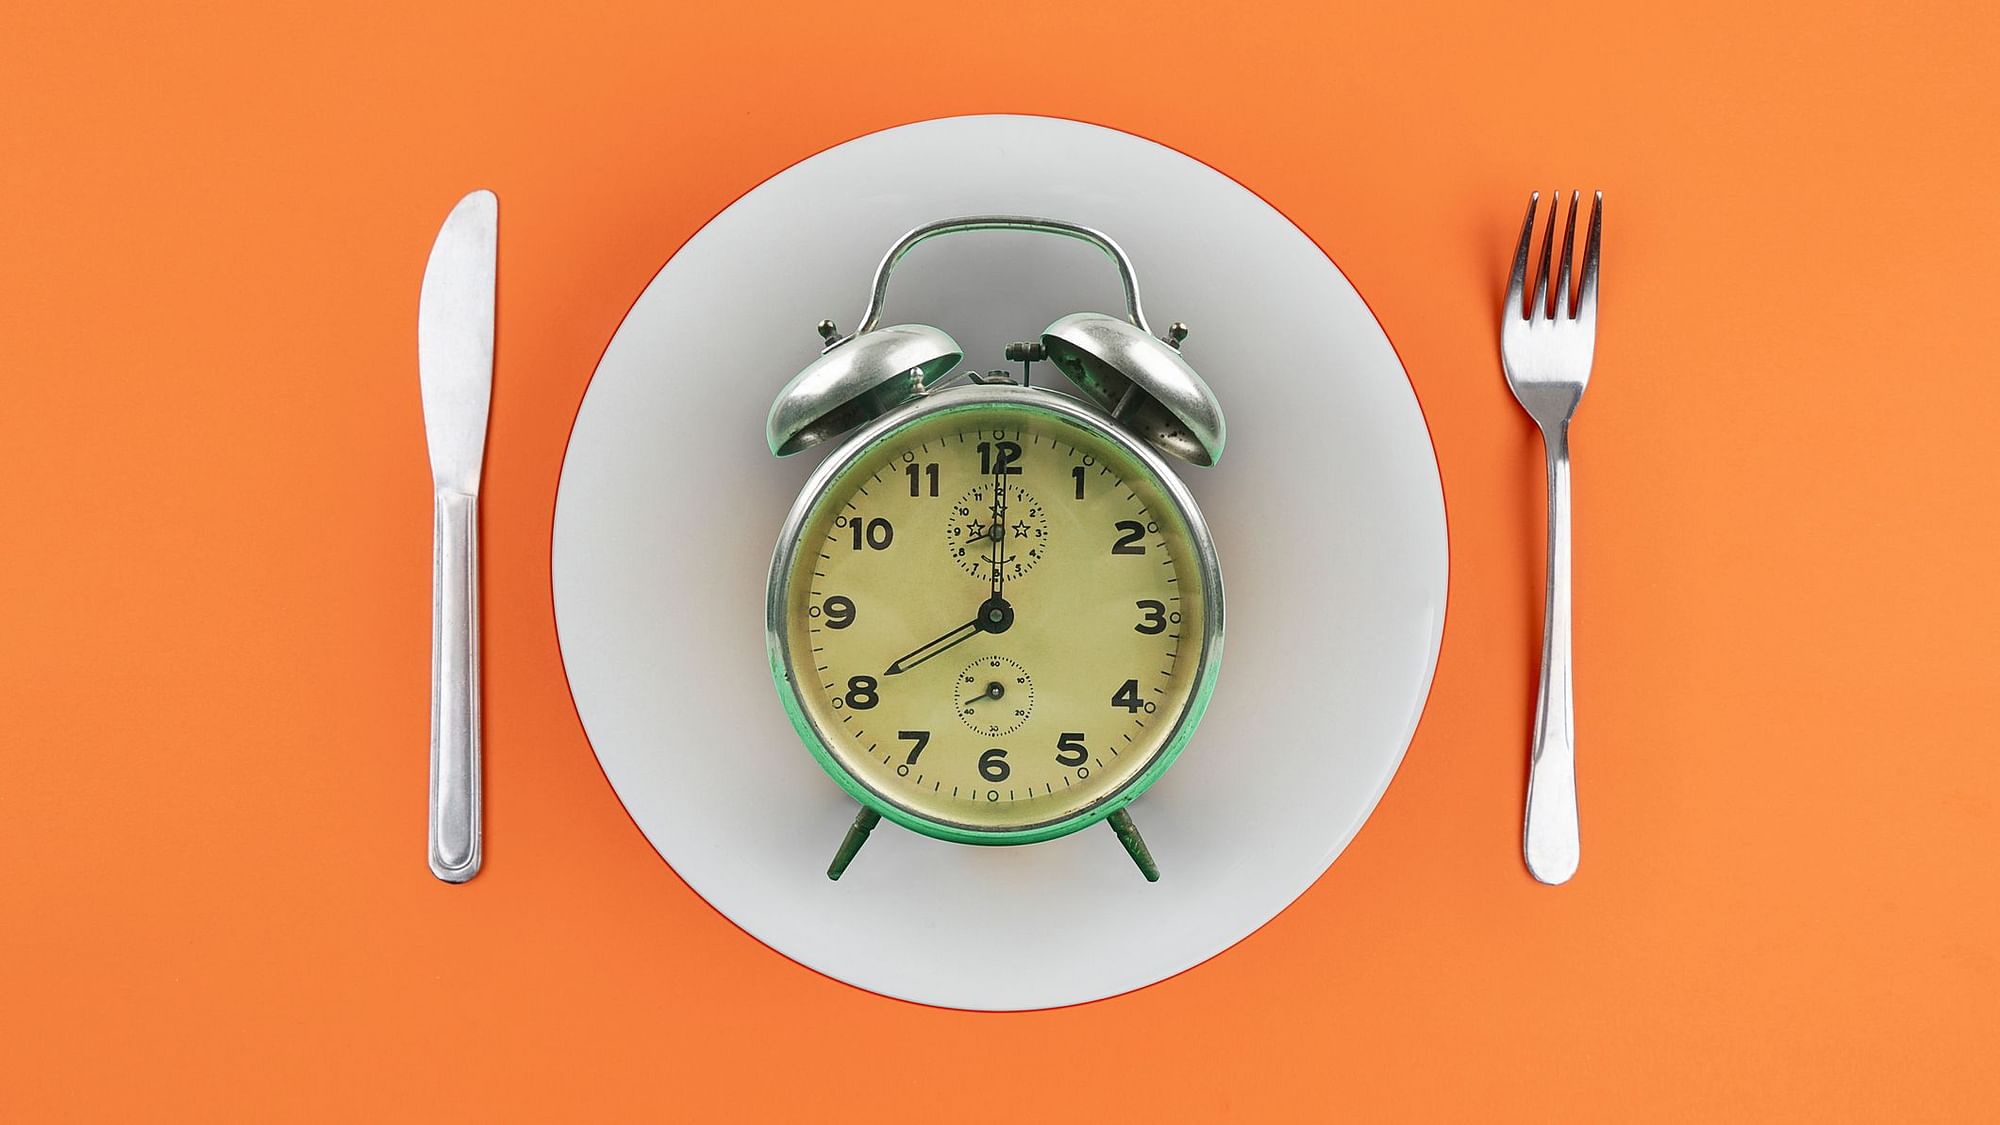 Key to longer life and weight loss- Intermittent fasting